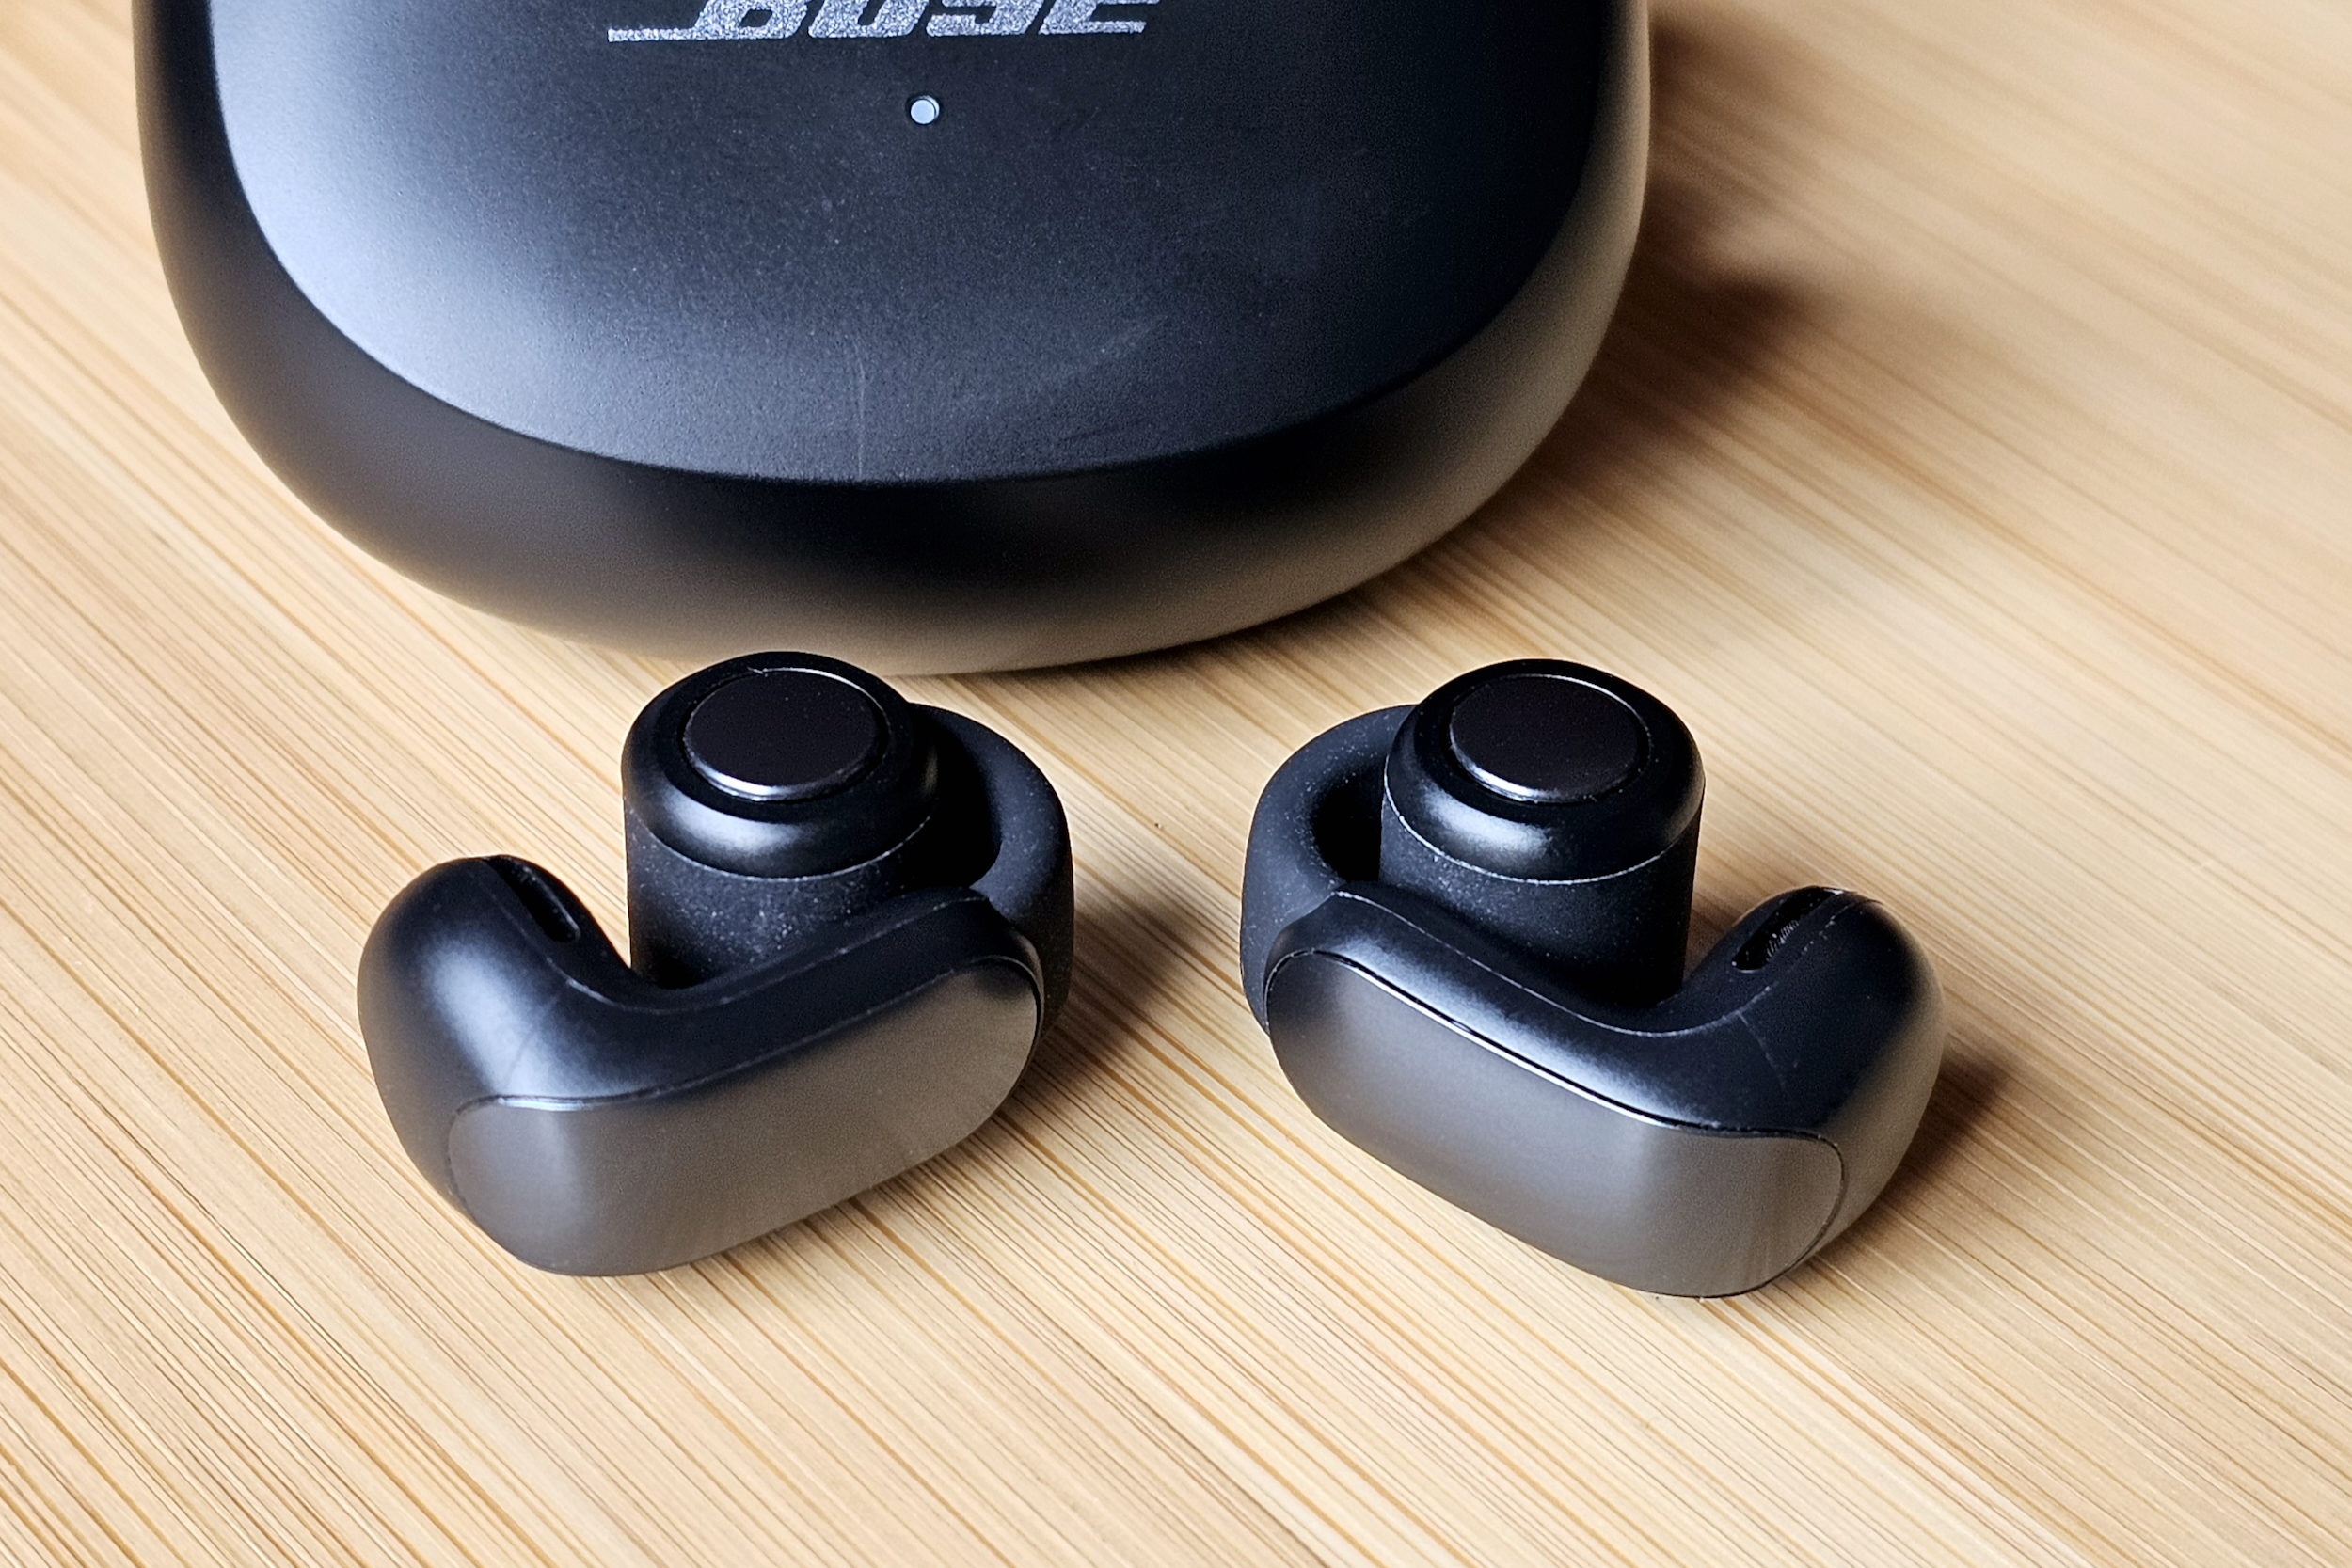 Bose Ultra Open Earbuds in front of their charging case.